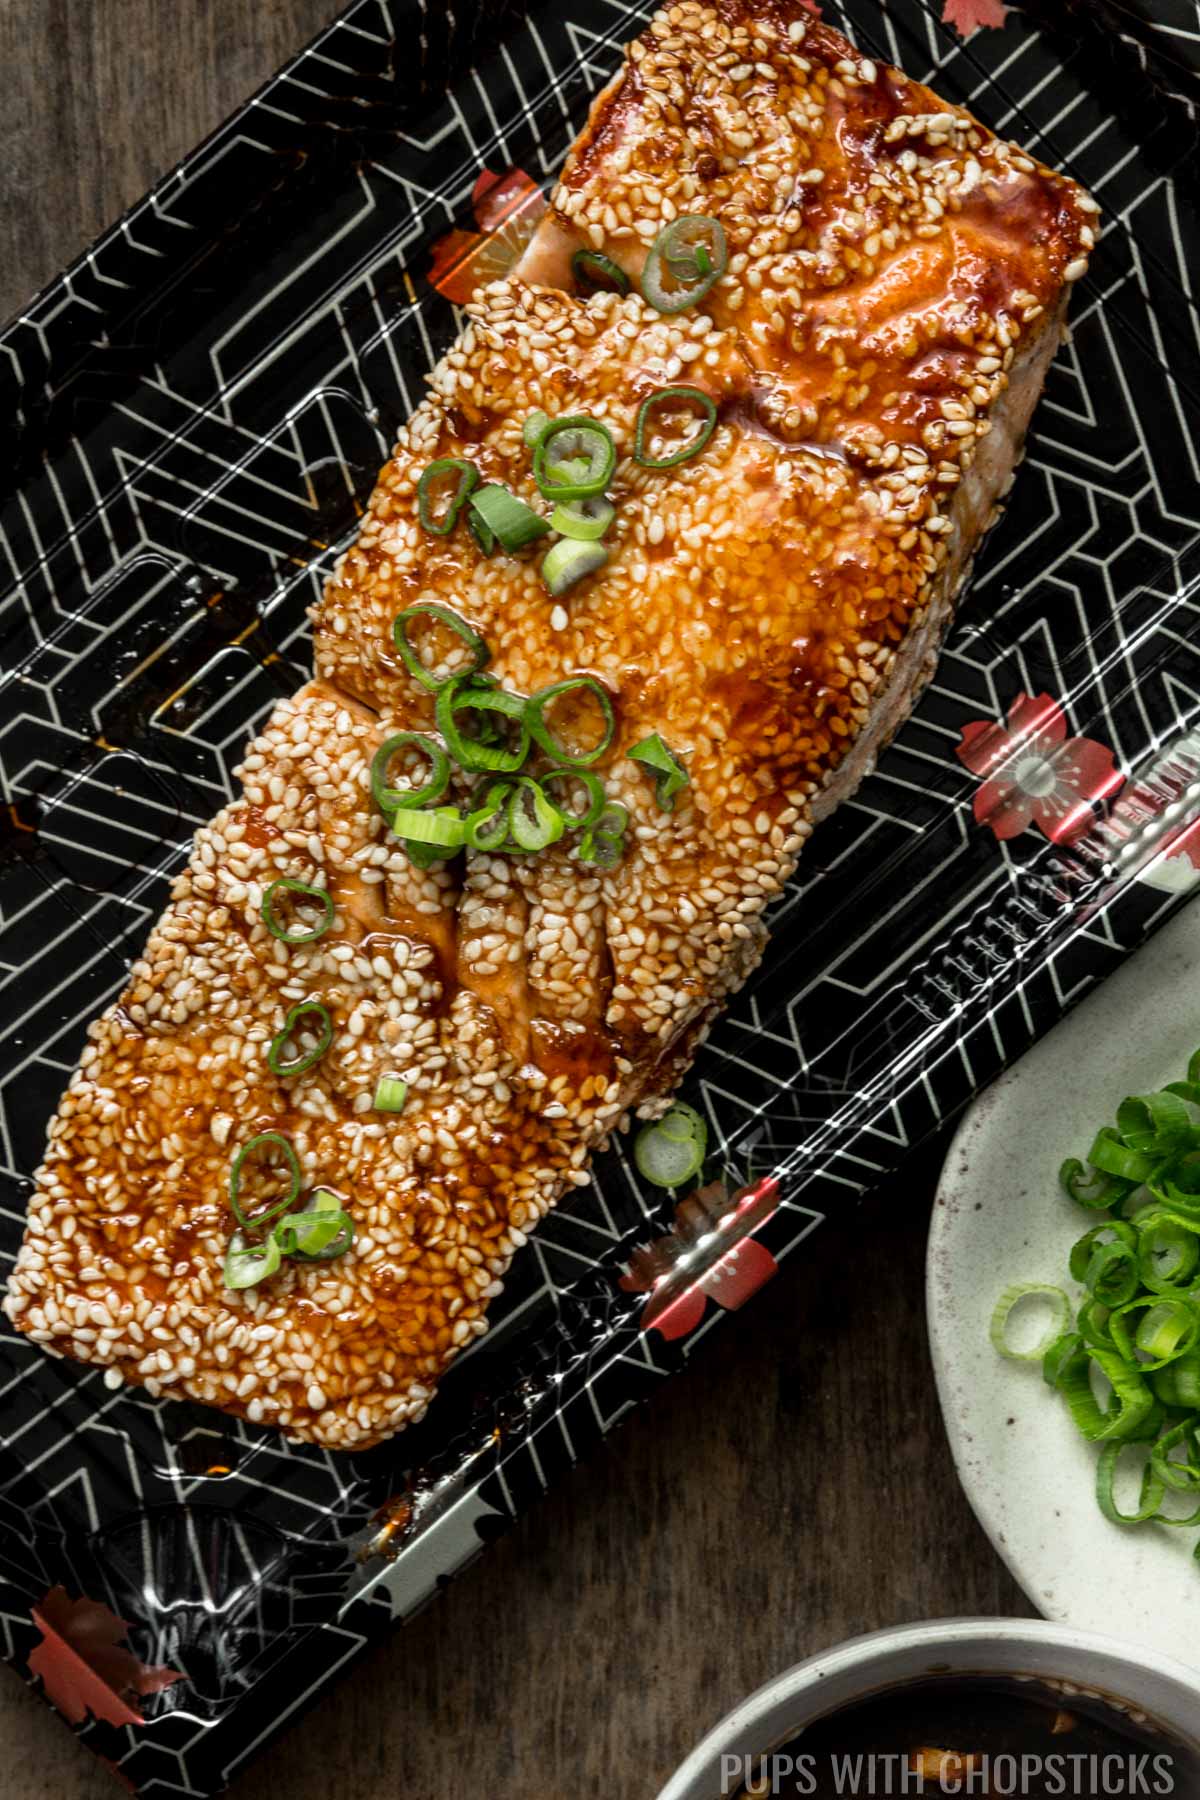 A cooked salmon filet, crusted with sesame seeds and glazed with teriyaki sauce in a takeout plate on a wooden table